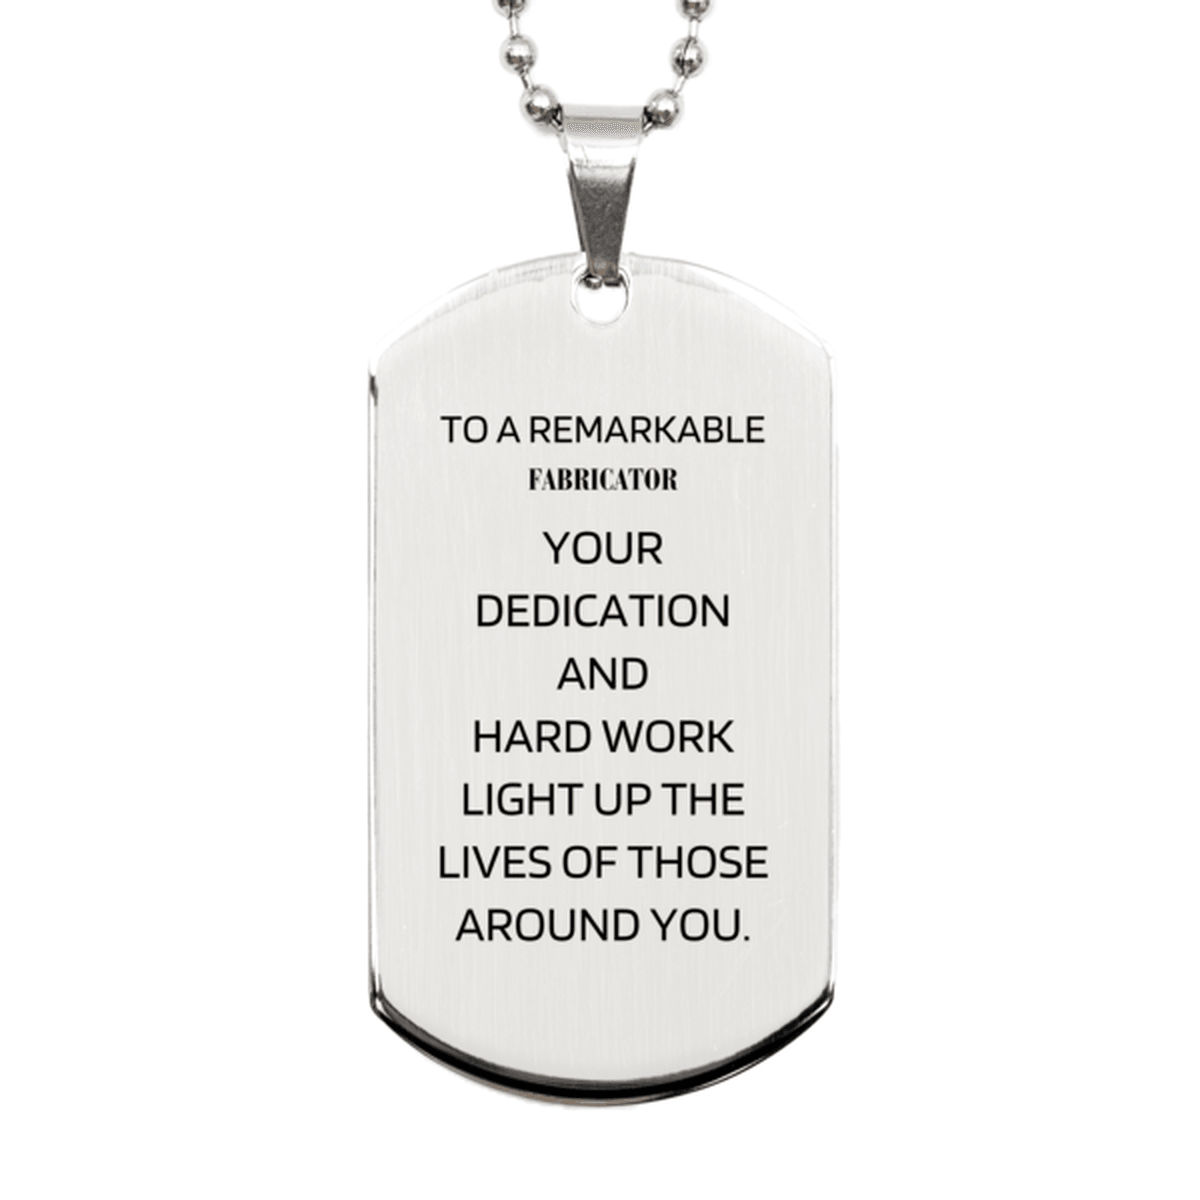 Remarkable Fabricator Gifts, Your dedication and hard work, Inspirational Birthday Christmas Unique Silver Dog Tag For Fabricator, Coworkers, Men, Women, Friends - Mallard Moon Gift Shop